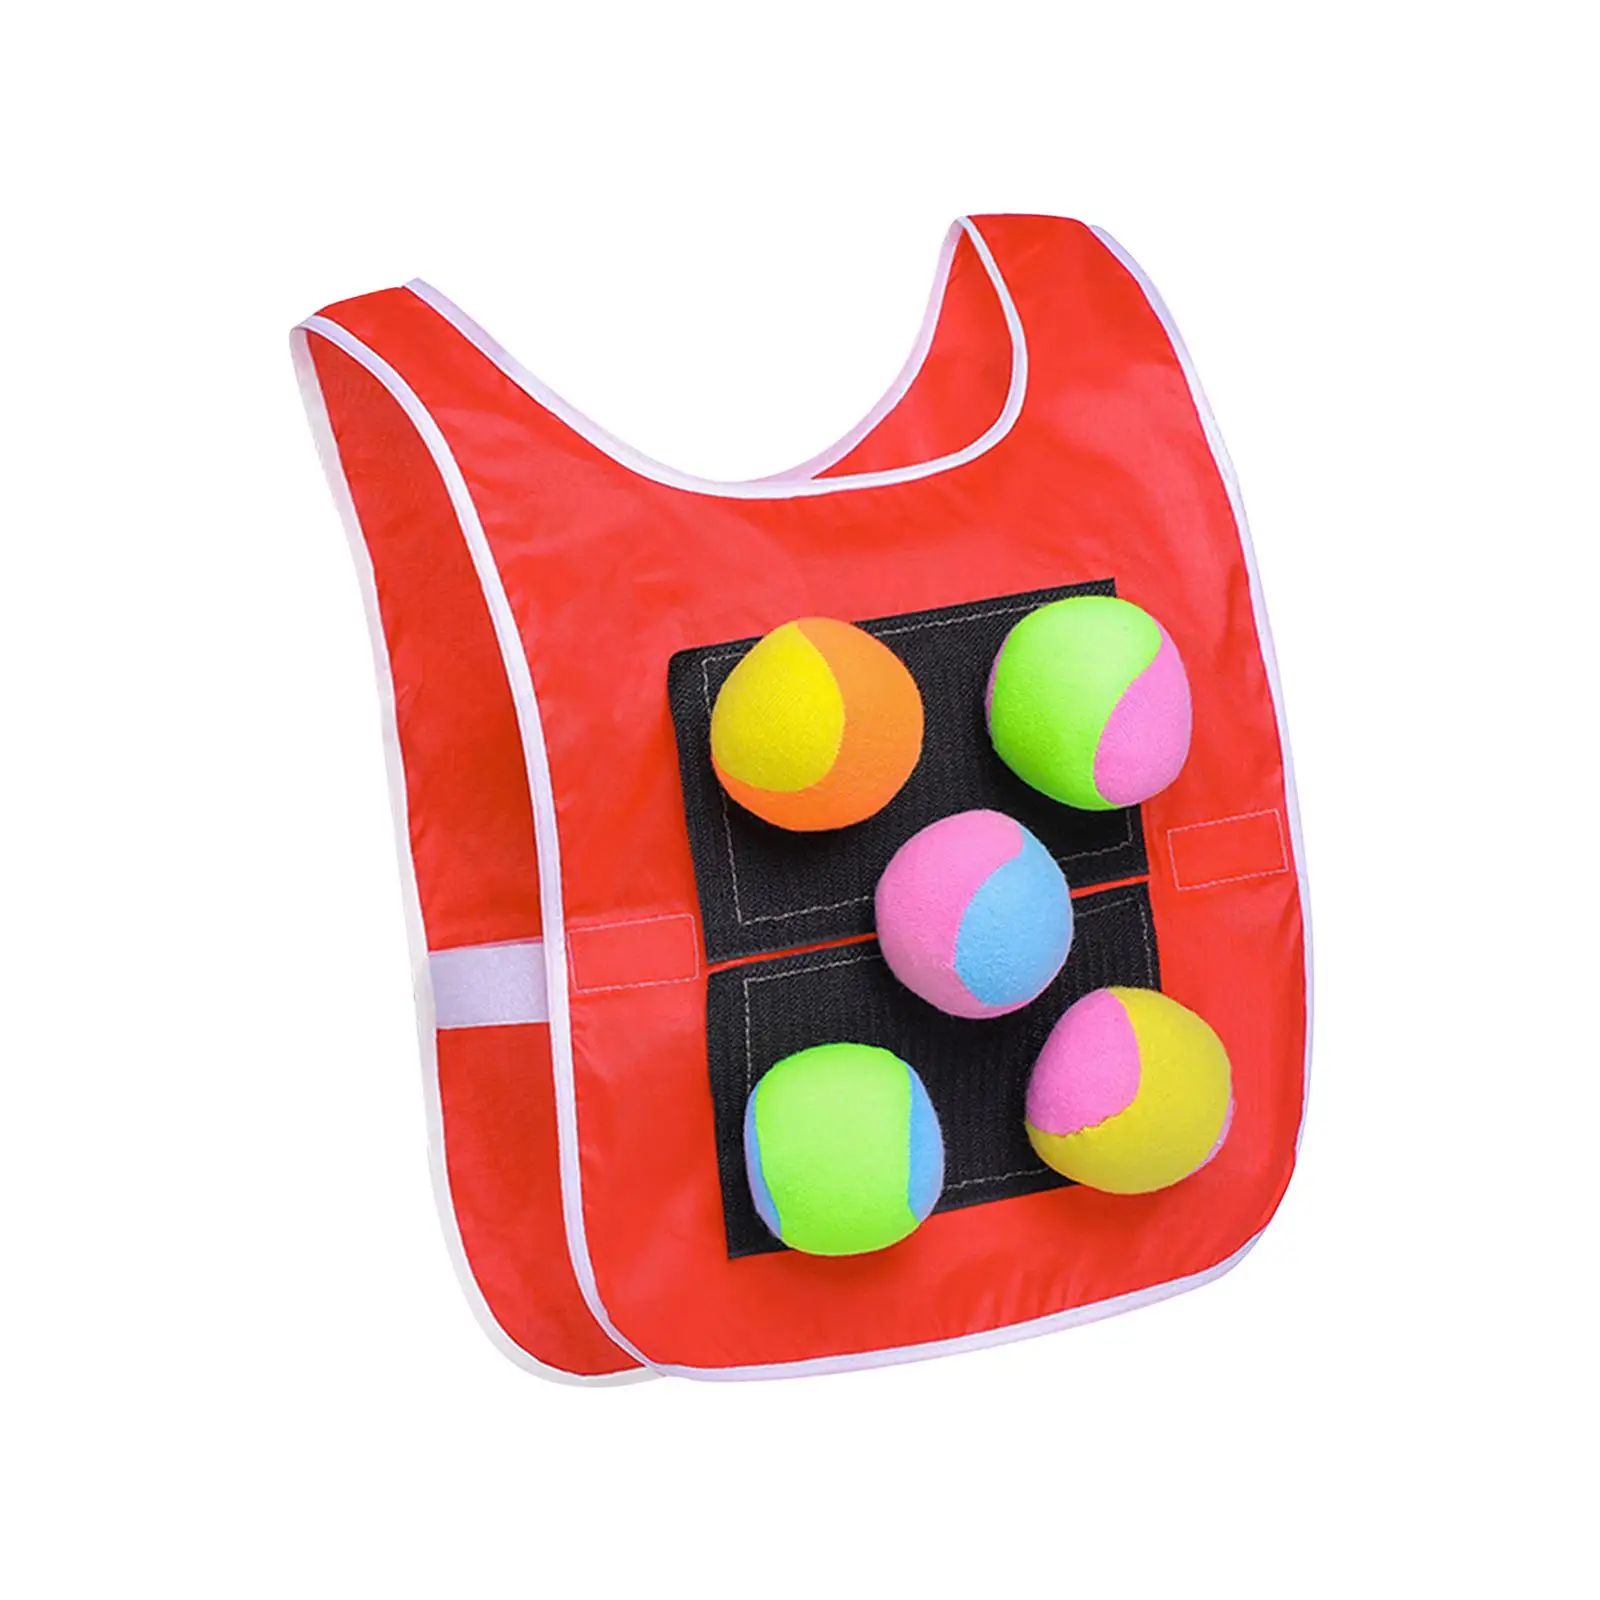 Dodgeball Game 5 Sticky Ball Toy Party Game Sticky Ball Vest Dodgeball Ball Game for Outside Beach Lawn Camping Outdoor Activity